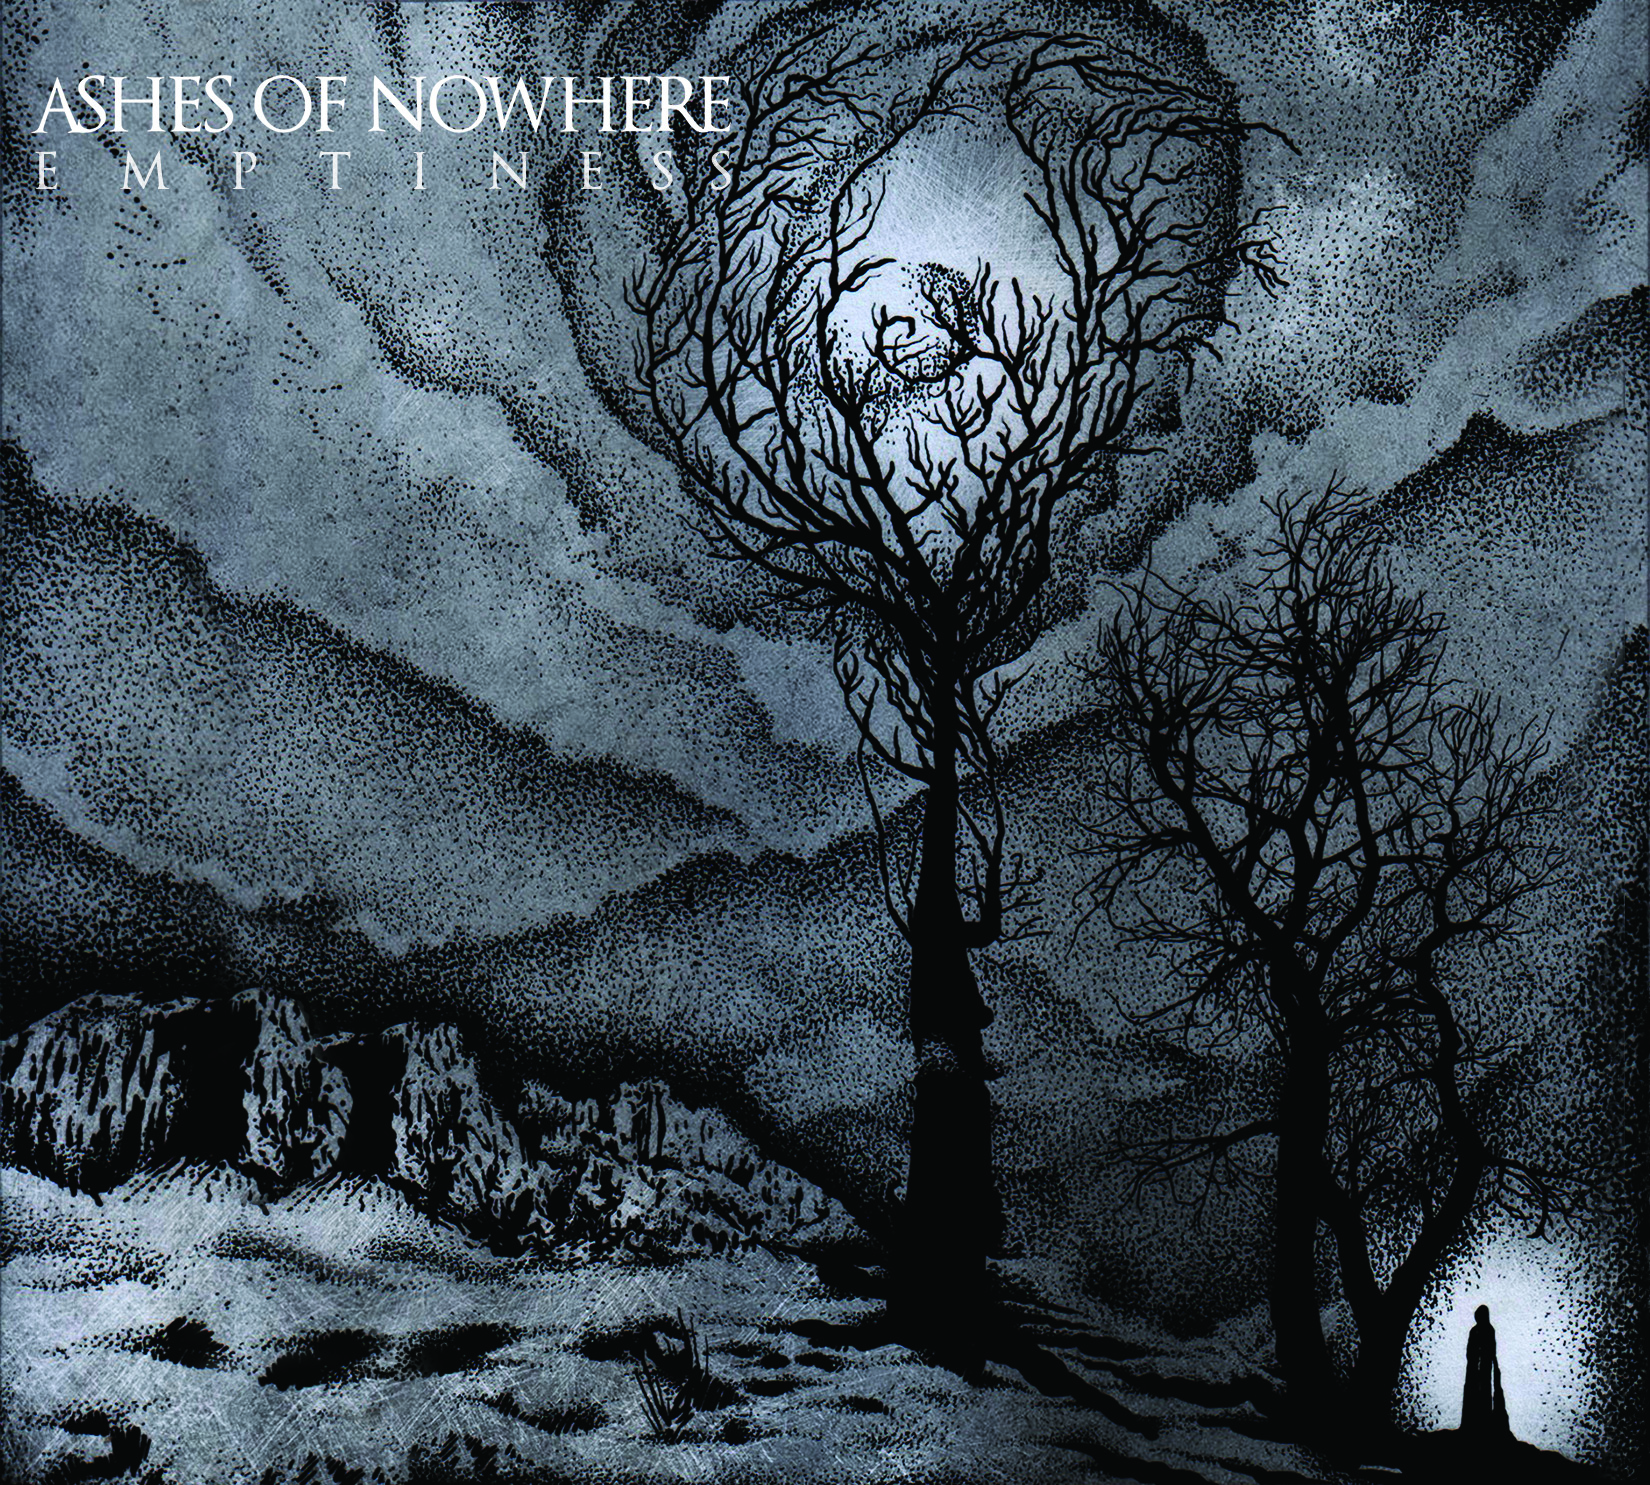 Ashes Of Nowhere Emptiness